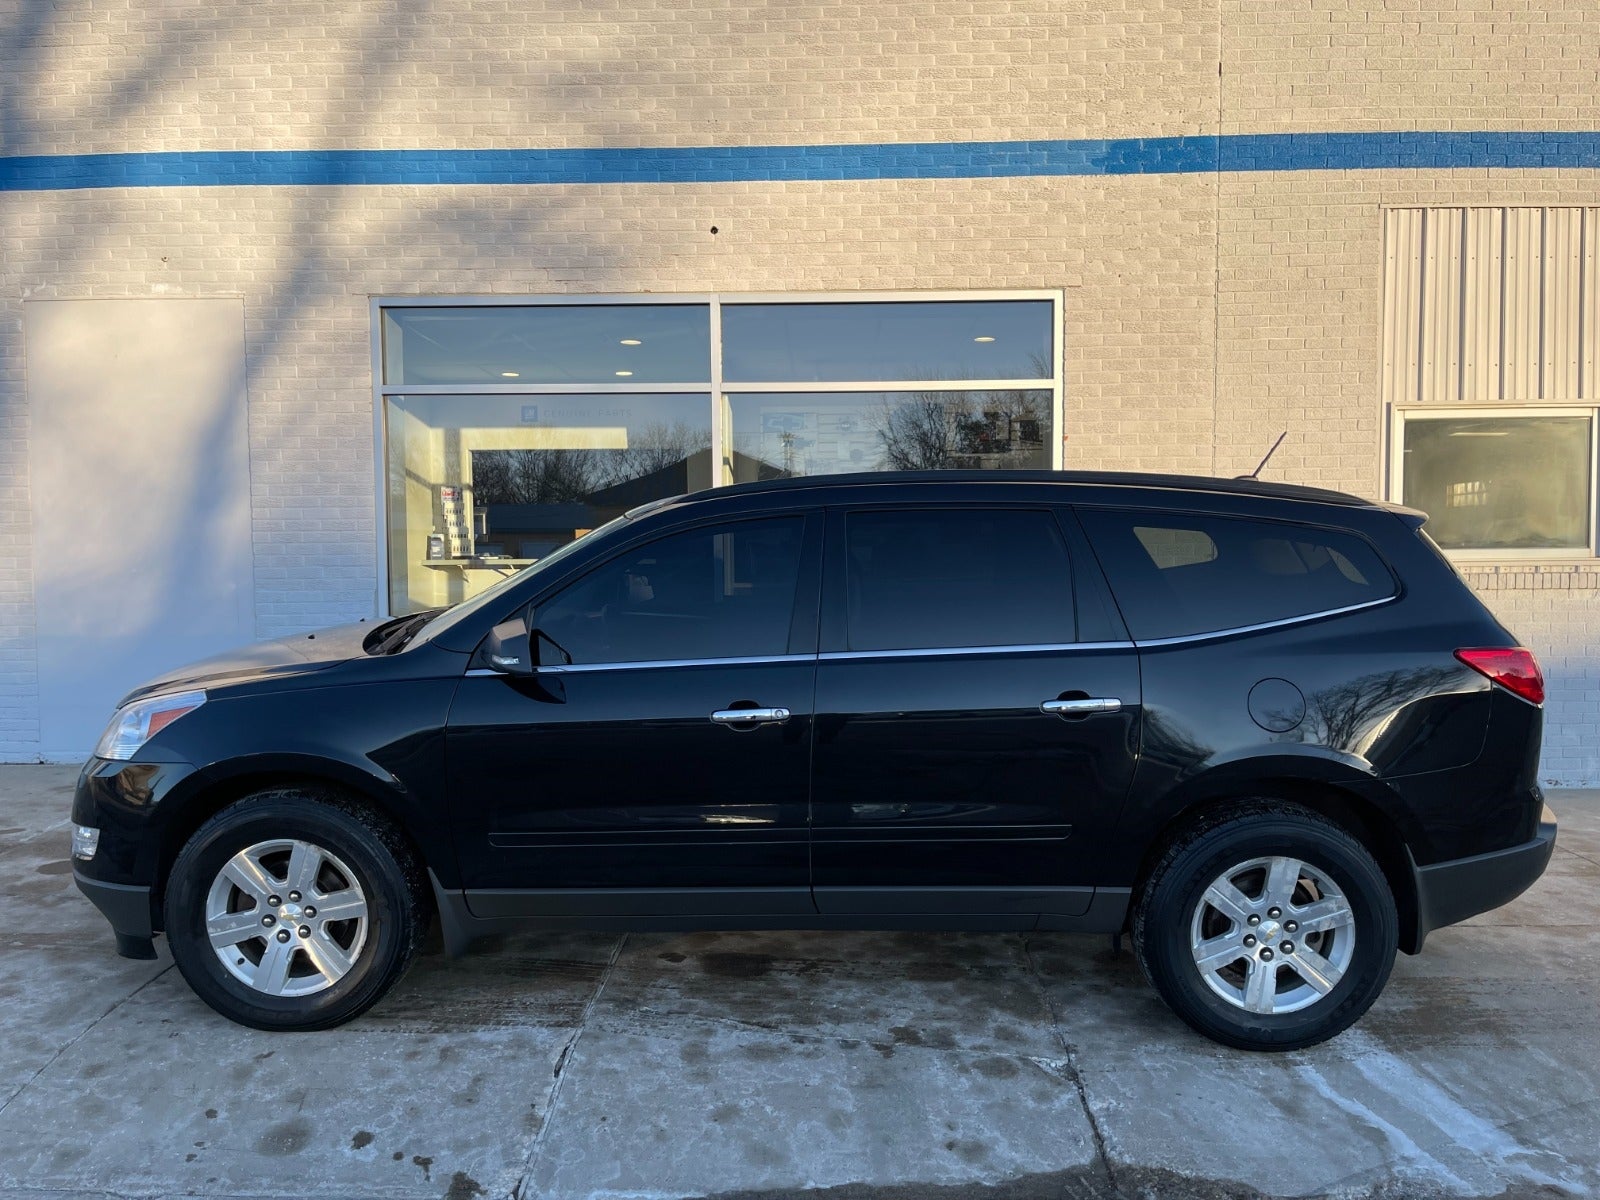 Used 2011 Chevrolet Traverse 1LT with VIN 1GNKVGED0BJ160317 for sale in Edgerton, Minnesota